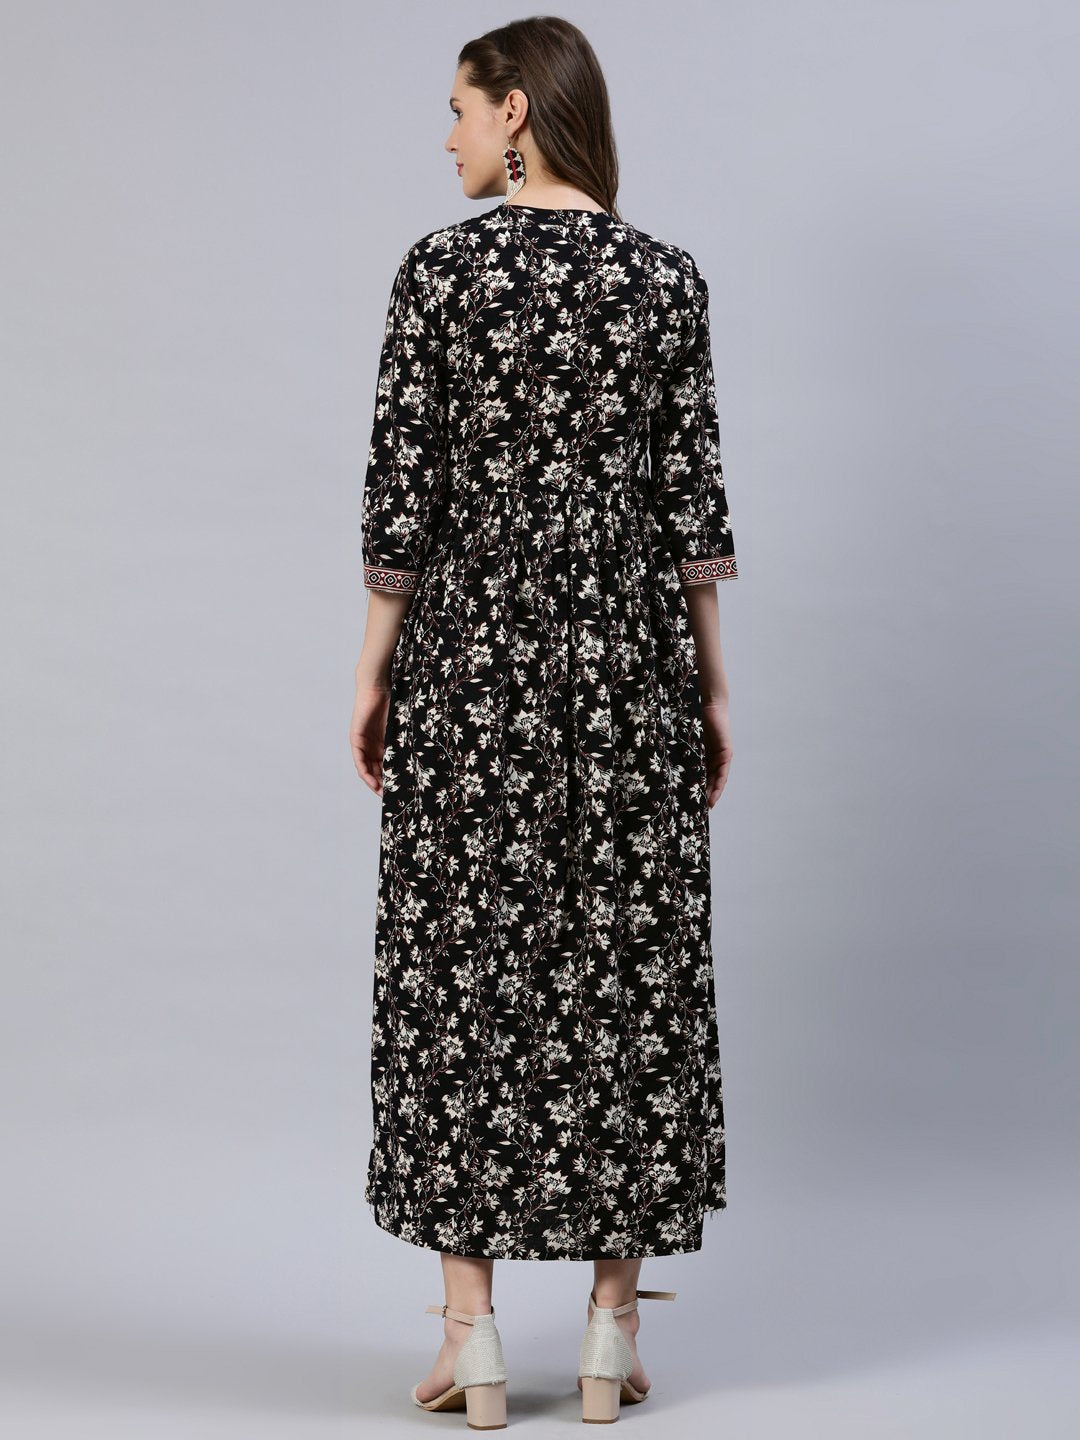 Women's Black Floral Printed Dress With Three Quarter Sleeves - Nayo Clothing